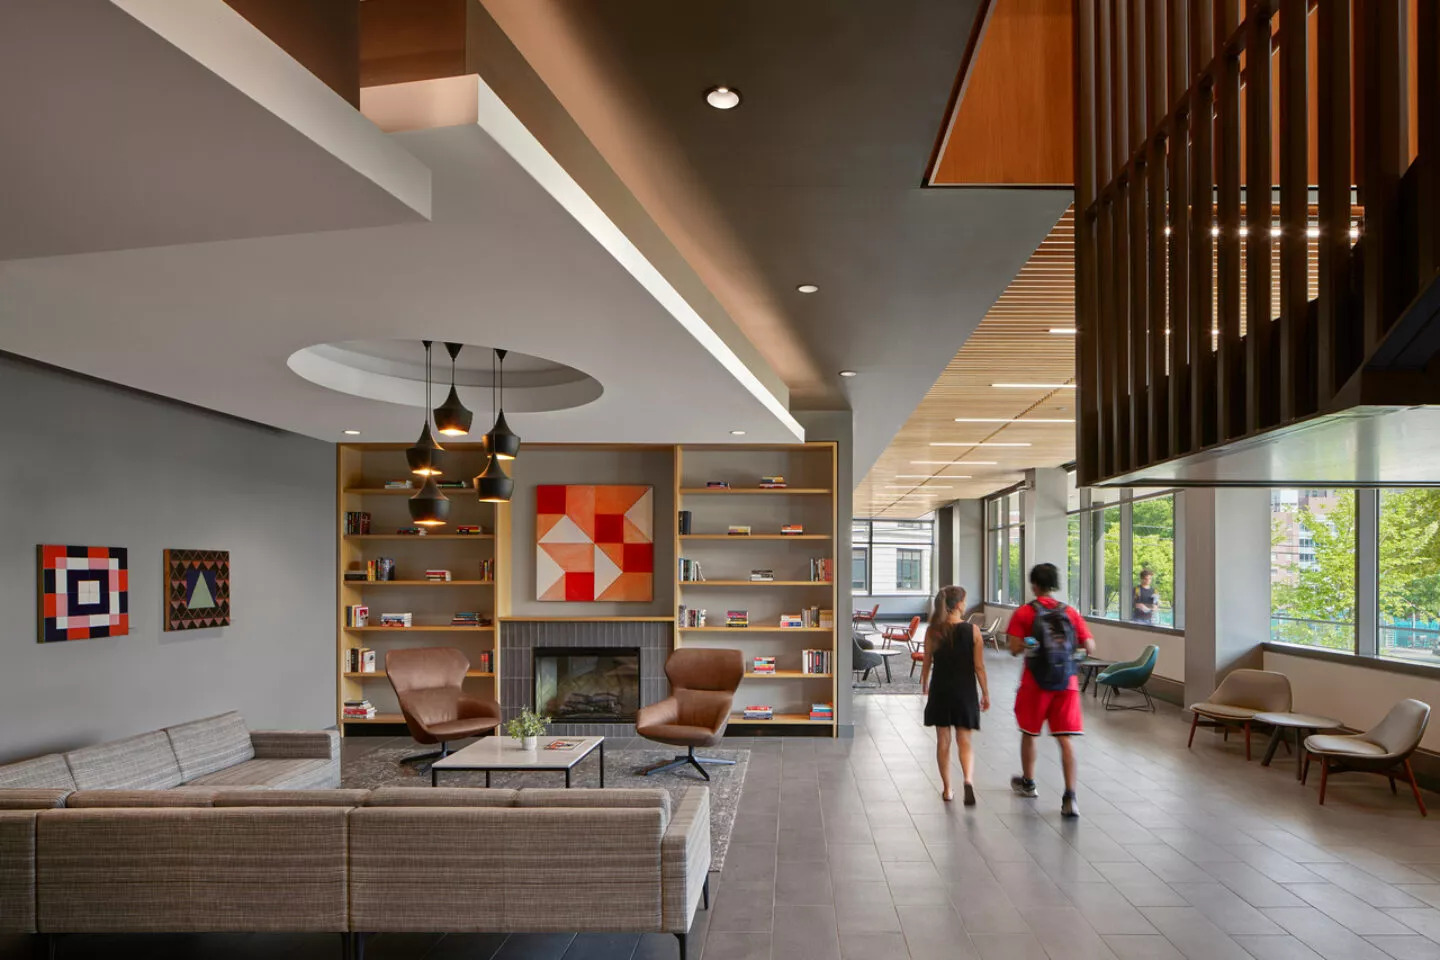 SCB's Bentley Hall and Pennoni Honors College. Interior Design. Campus Environments.